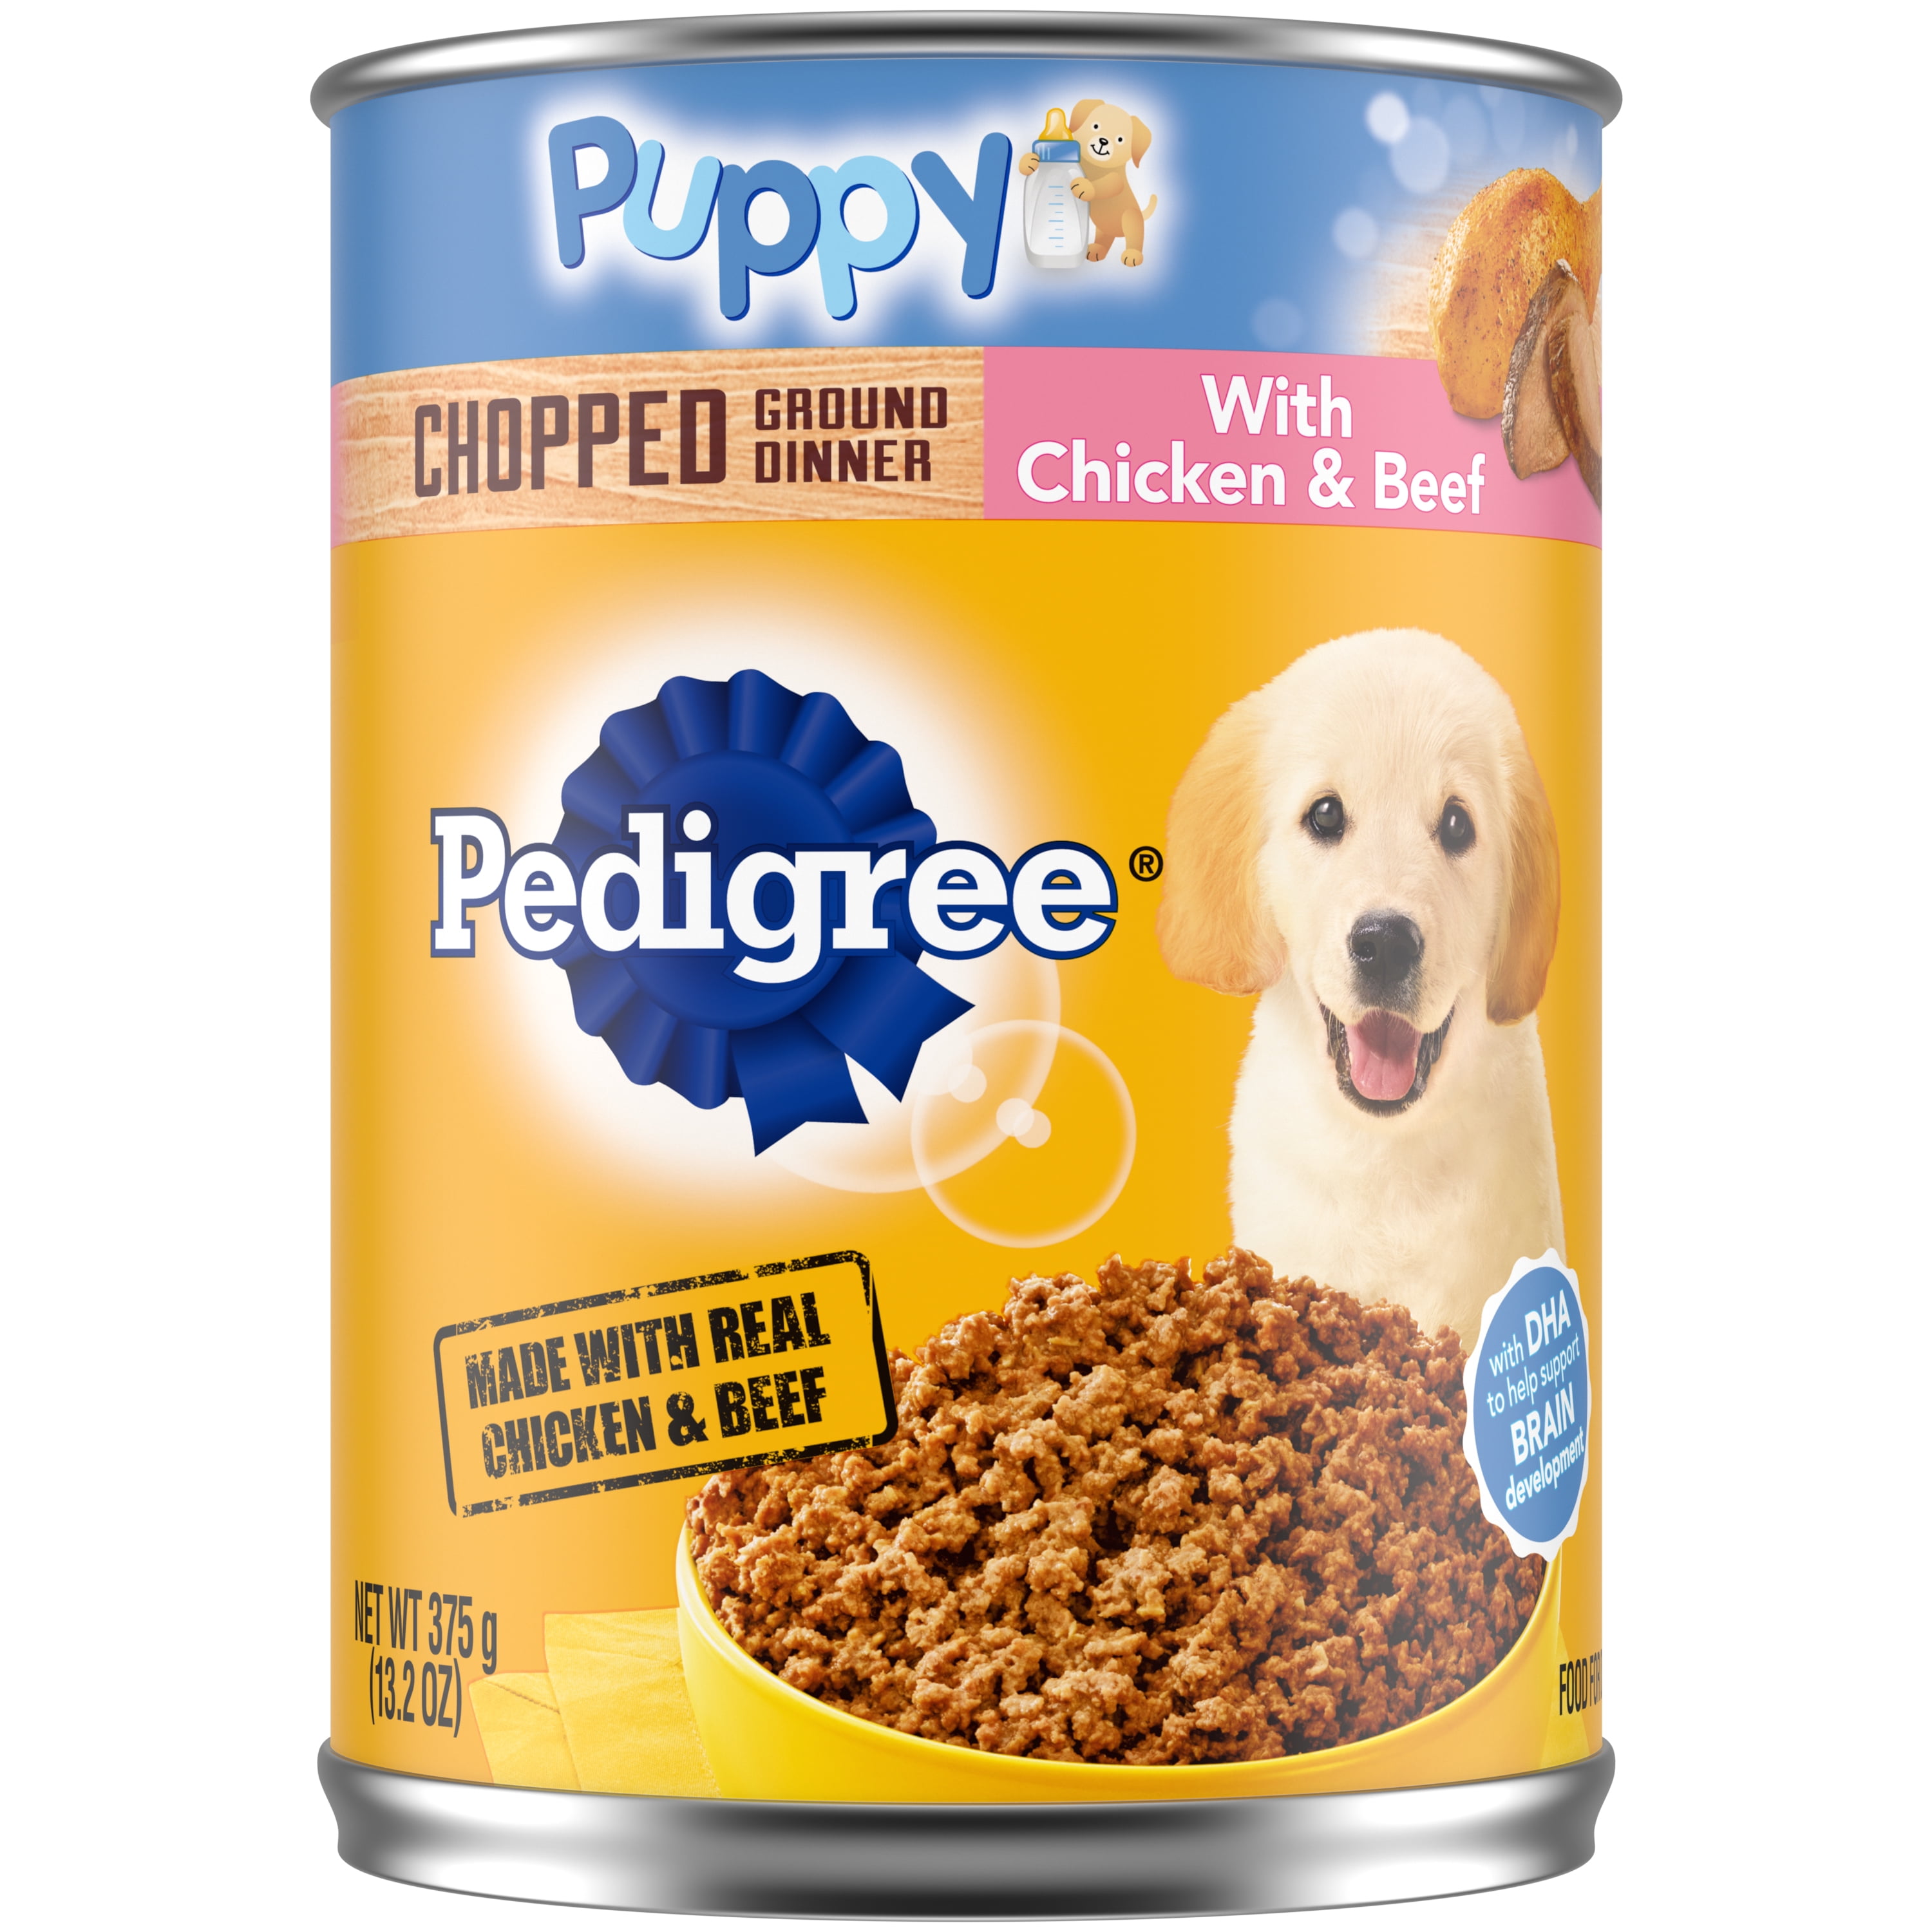 Pedigree Chopped Ground Dinner Chicken & Beef Wet Dog Food for Puppy, 13.2 oz. Can